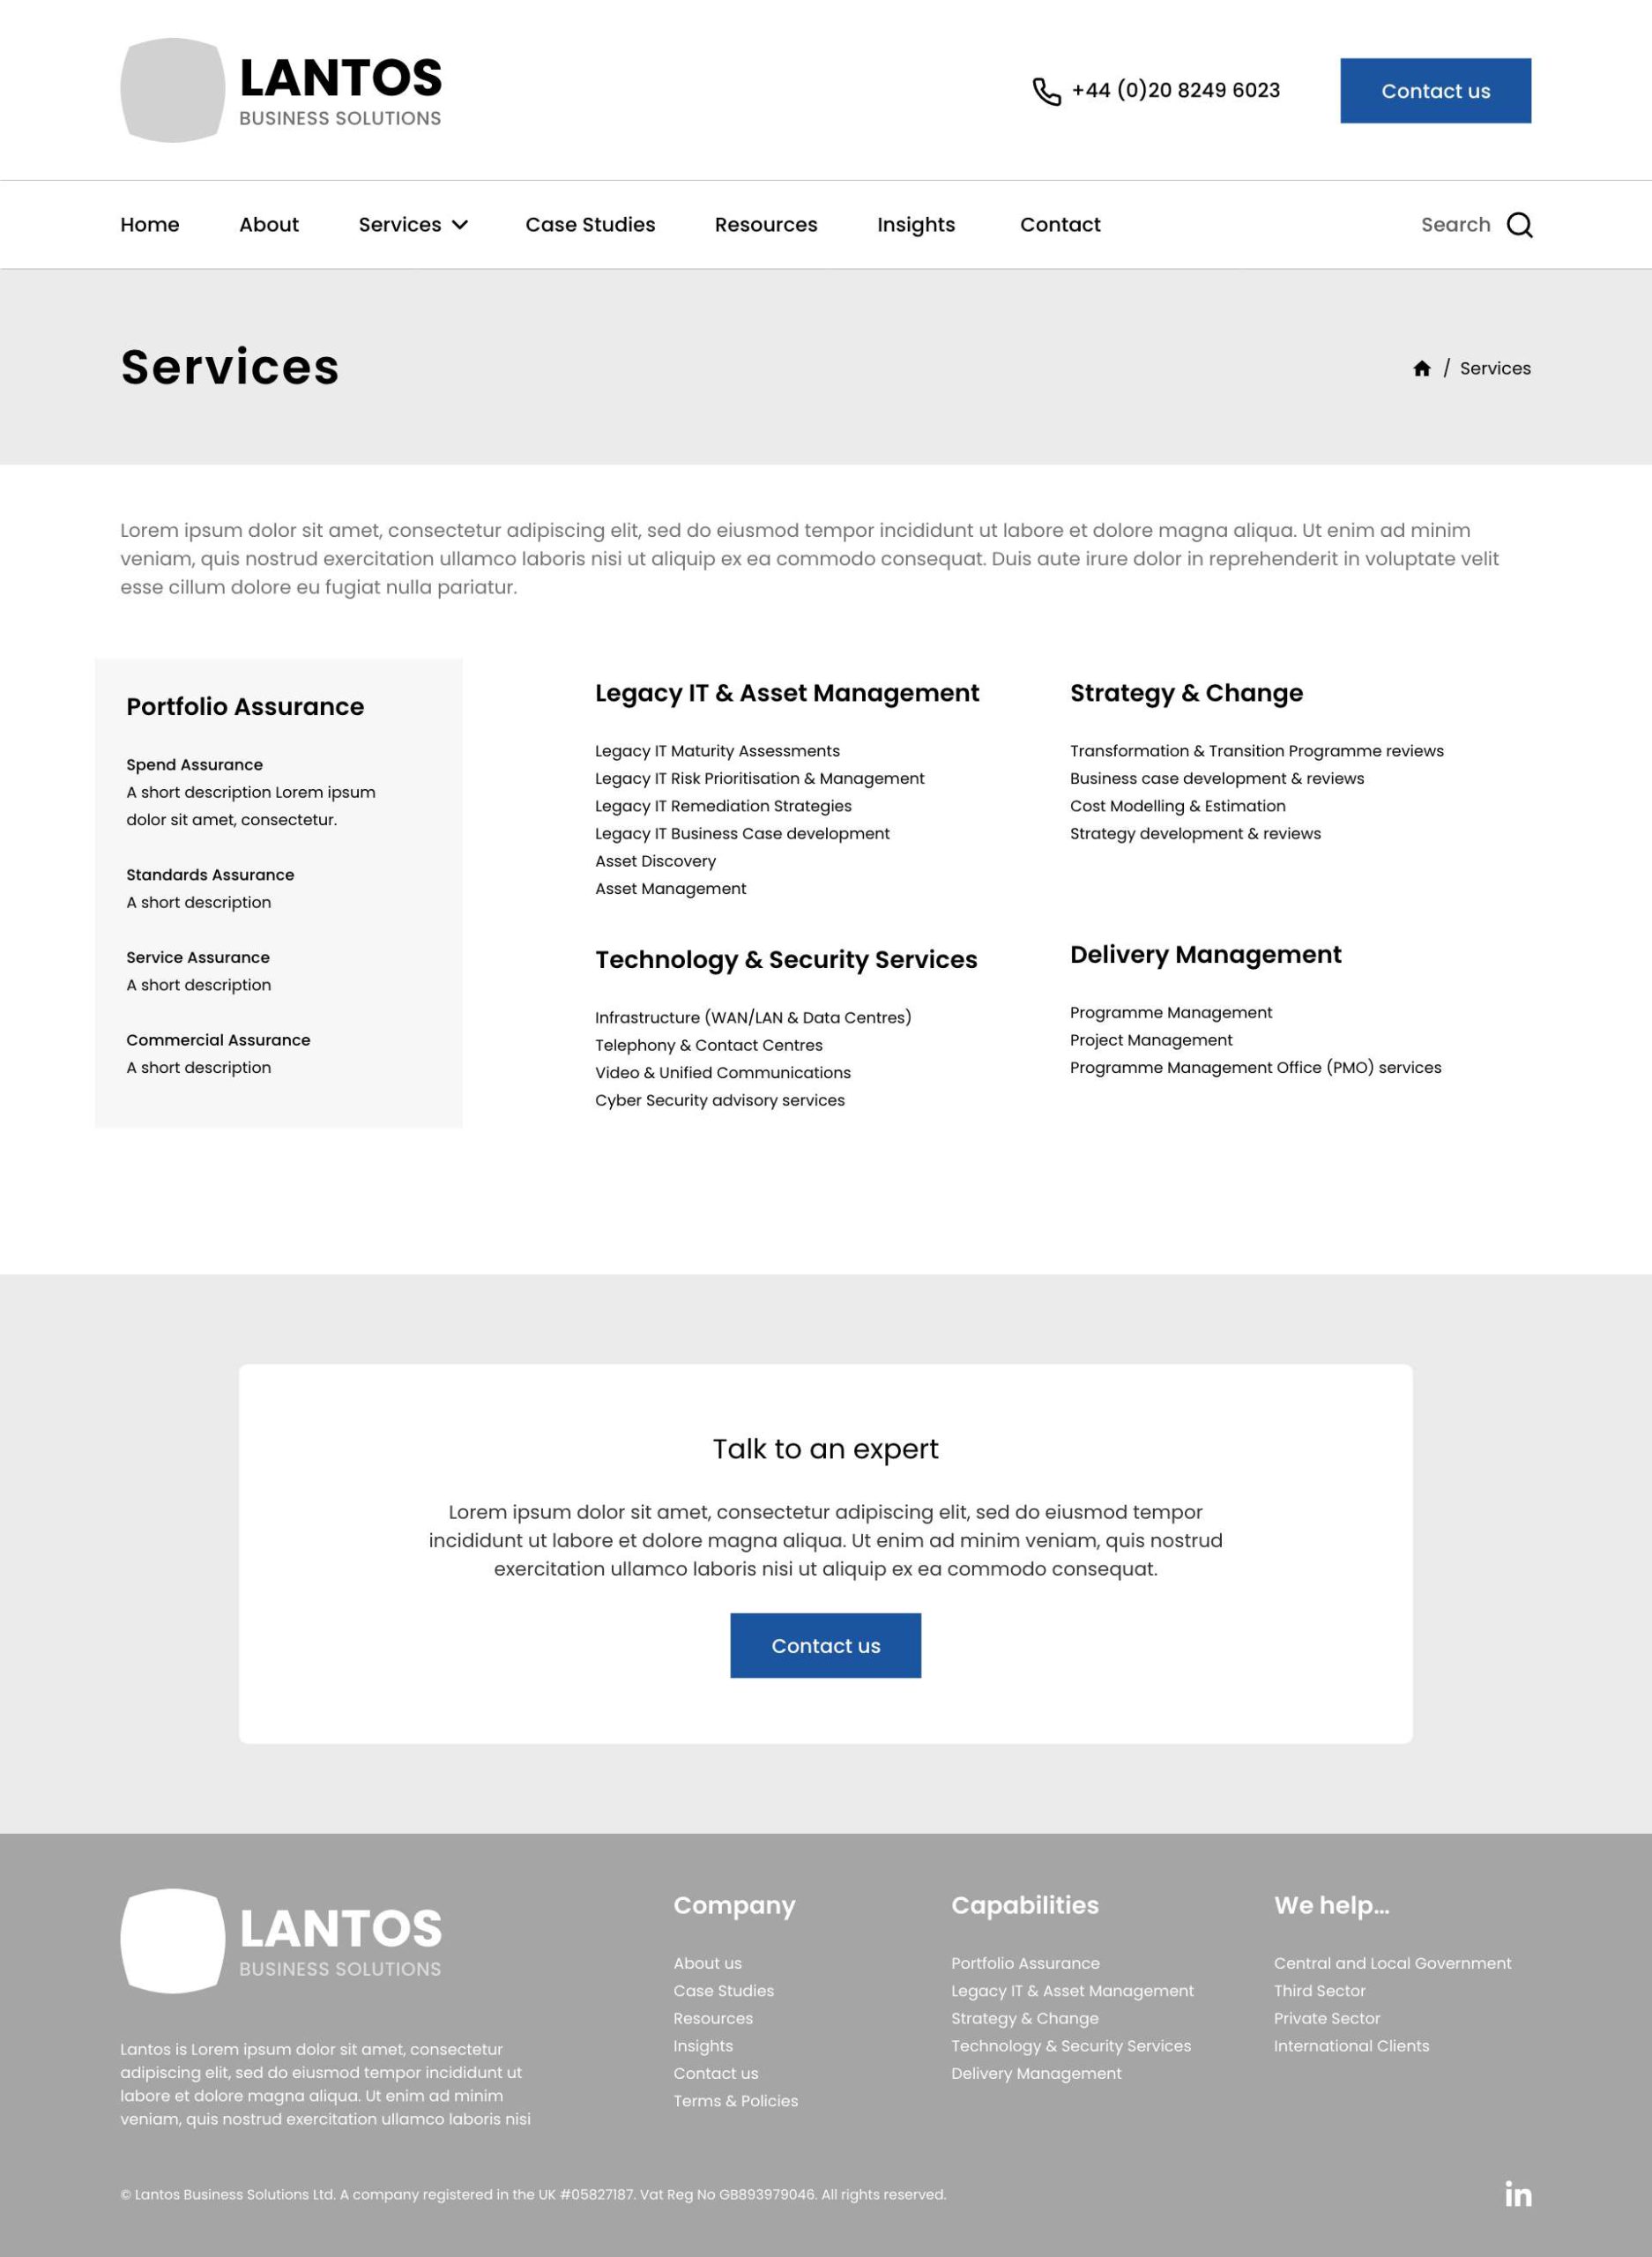 ethical-pixels-case-study-lantos-business-solutions-services-wireframe